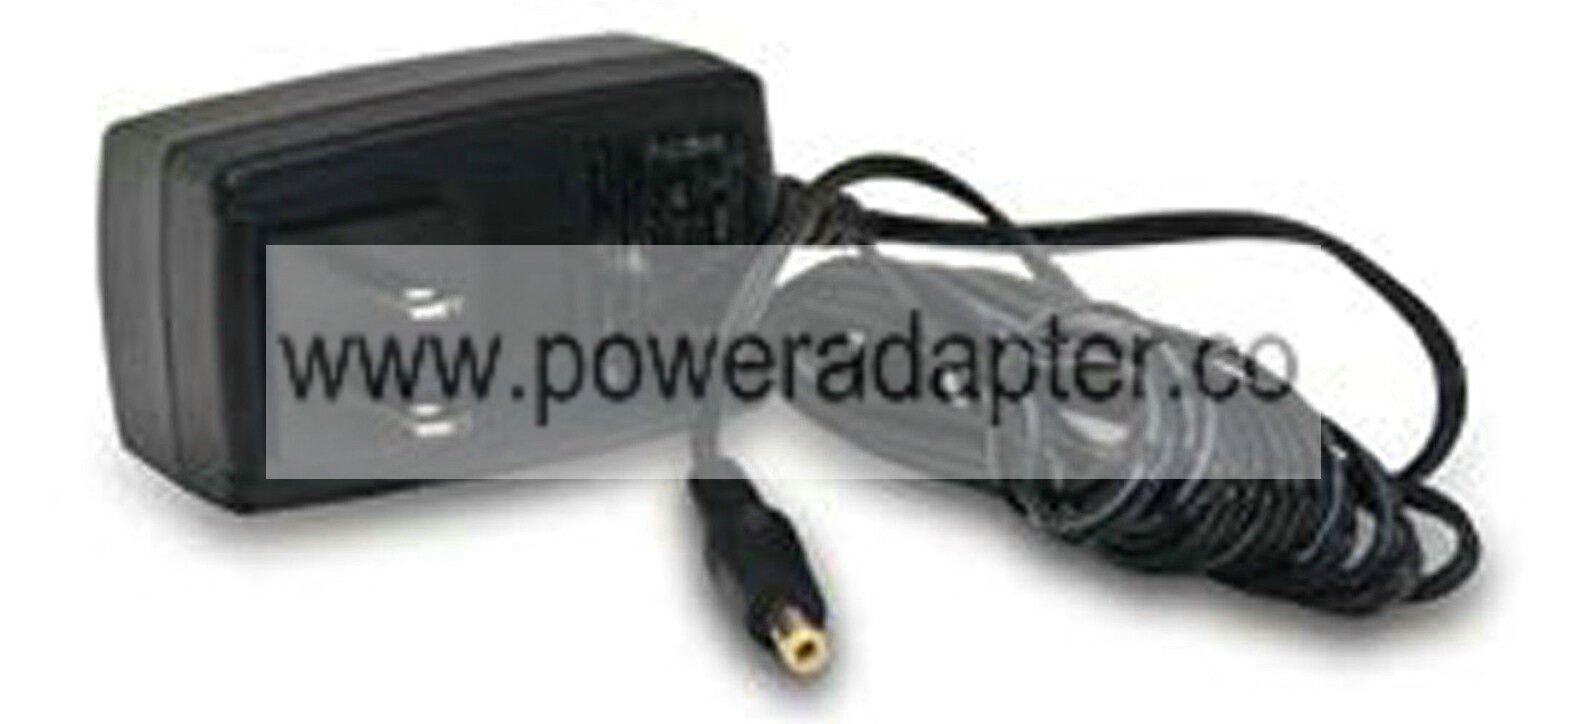 Topcon AD-13A Charger Adapter for TP-L4 Pipe Laser Batteries (BT-53Q) Model: AD-13A Brand: Topcon MPN: 313140002 M